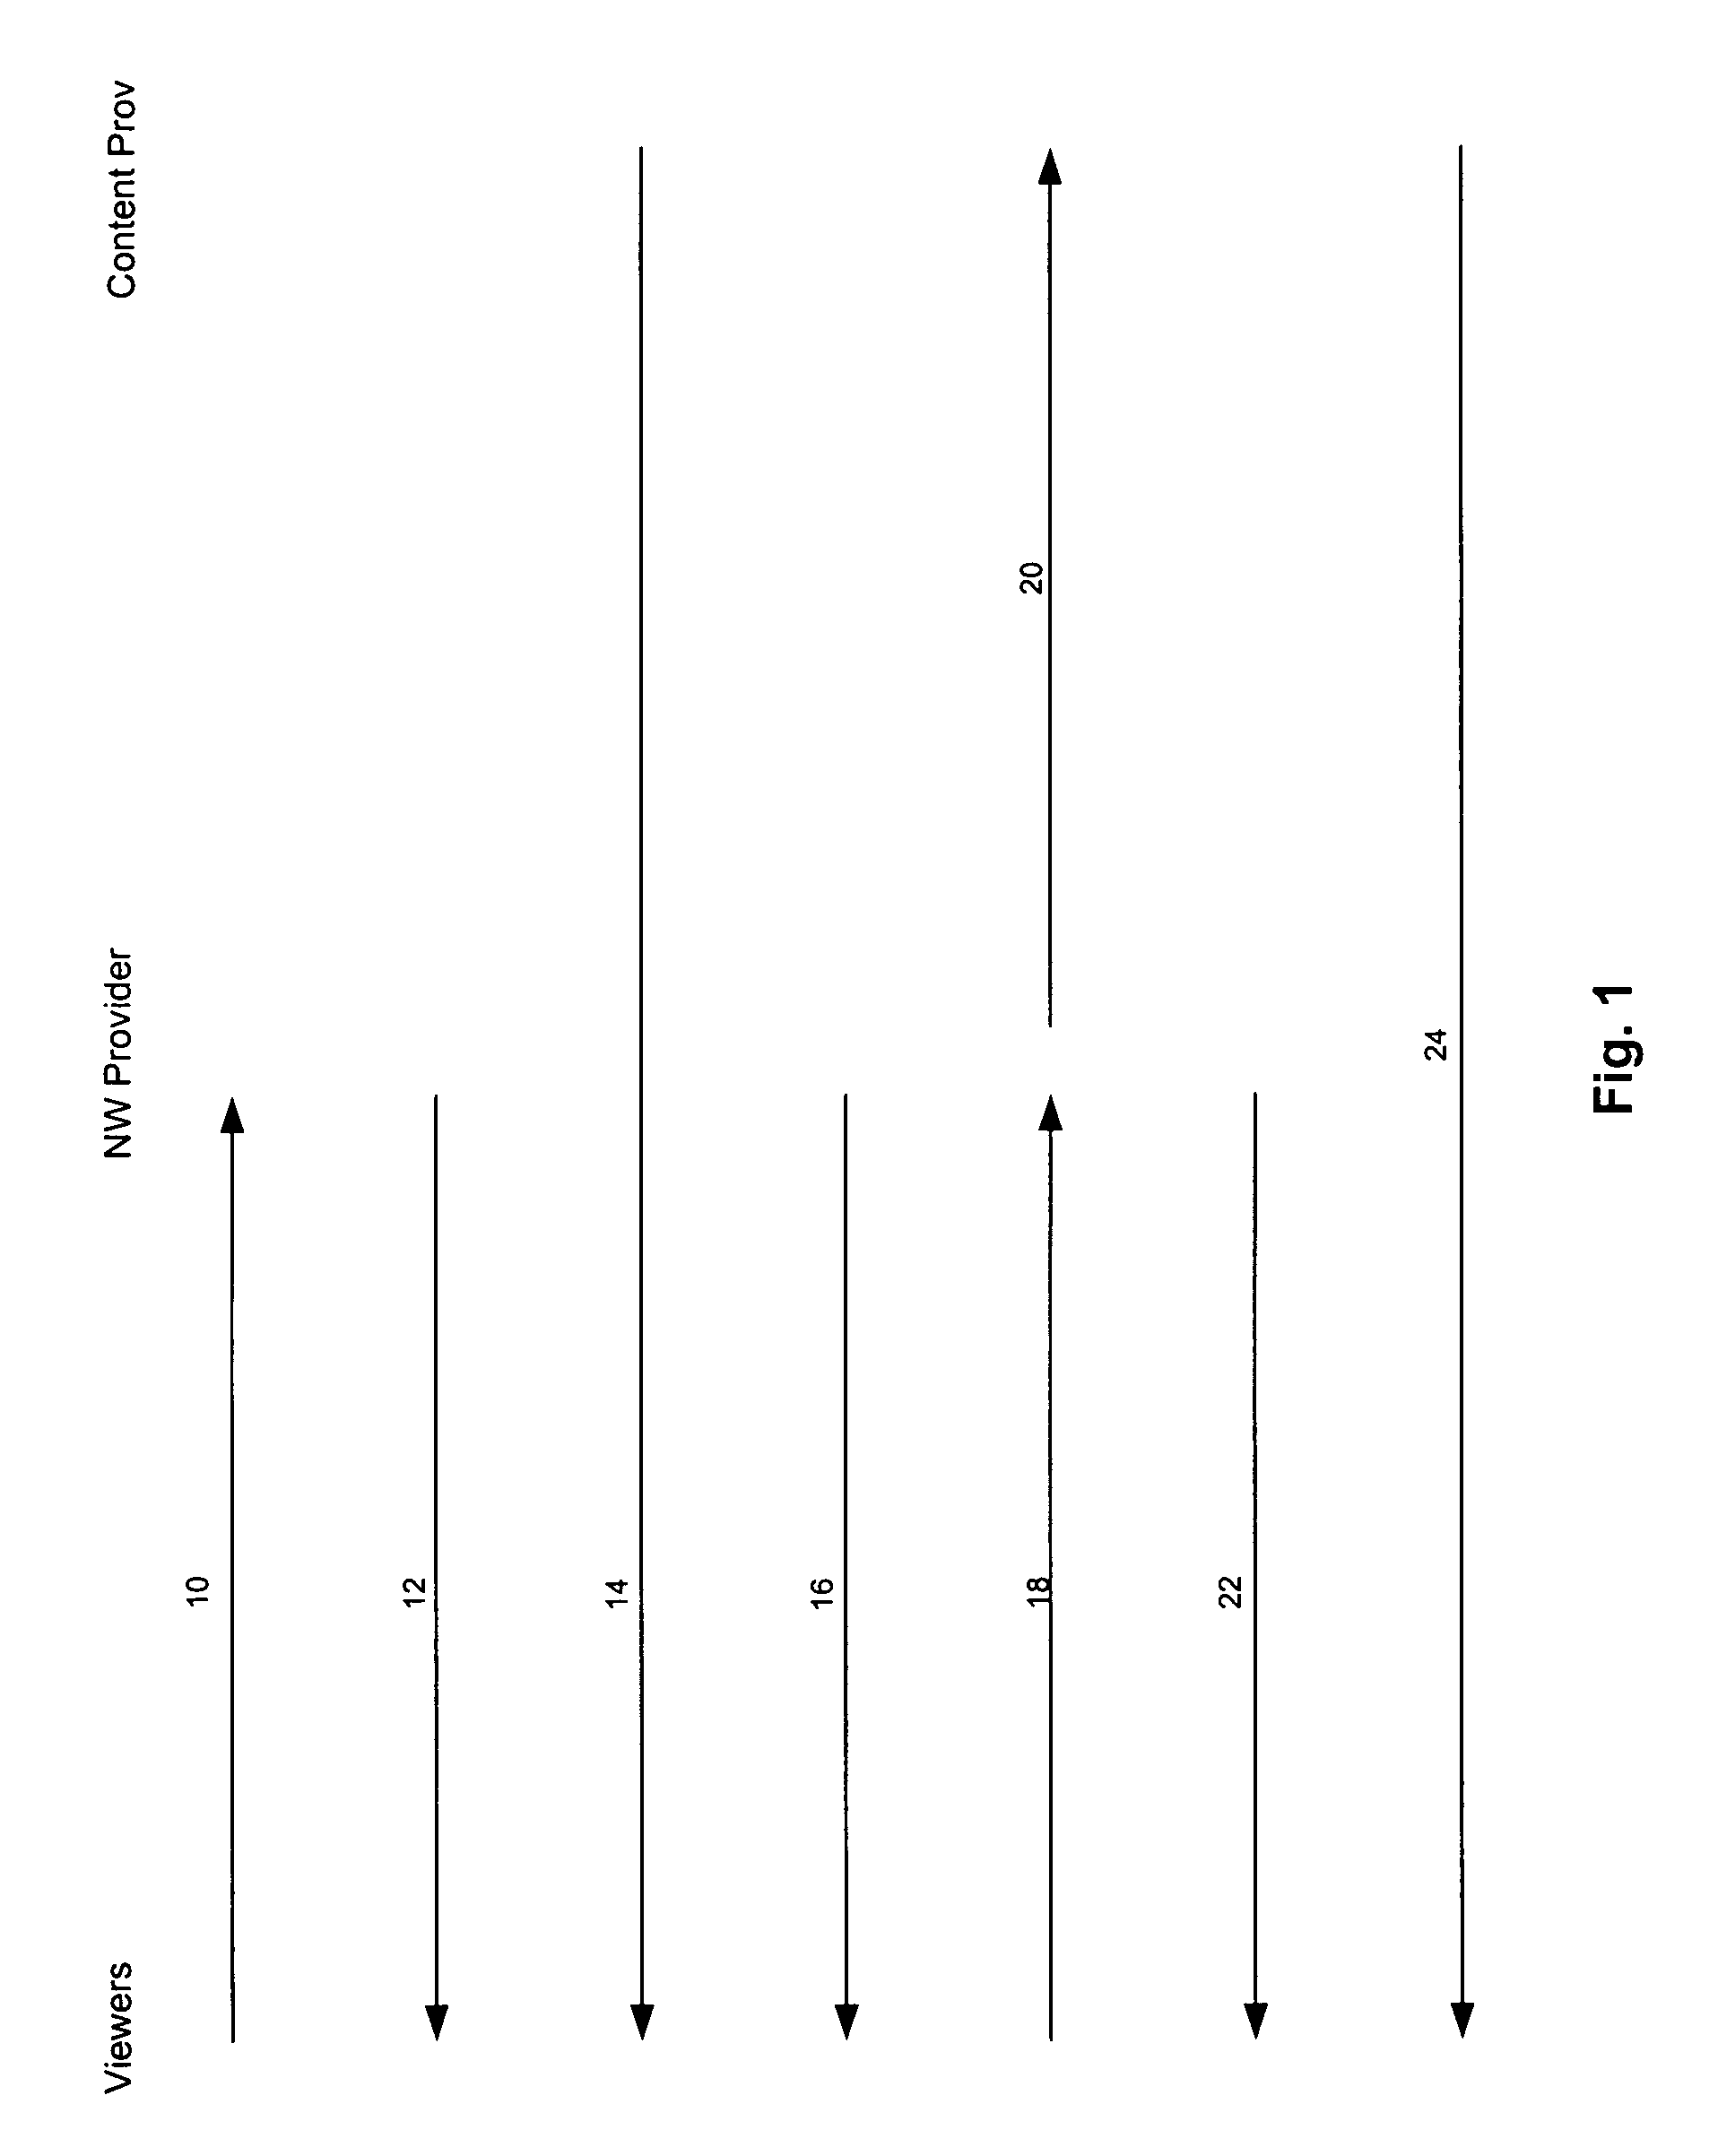 System and method for influencing dynamic community shared elements of audio, video, and text programming via a polling system